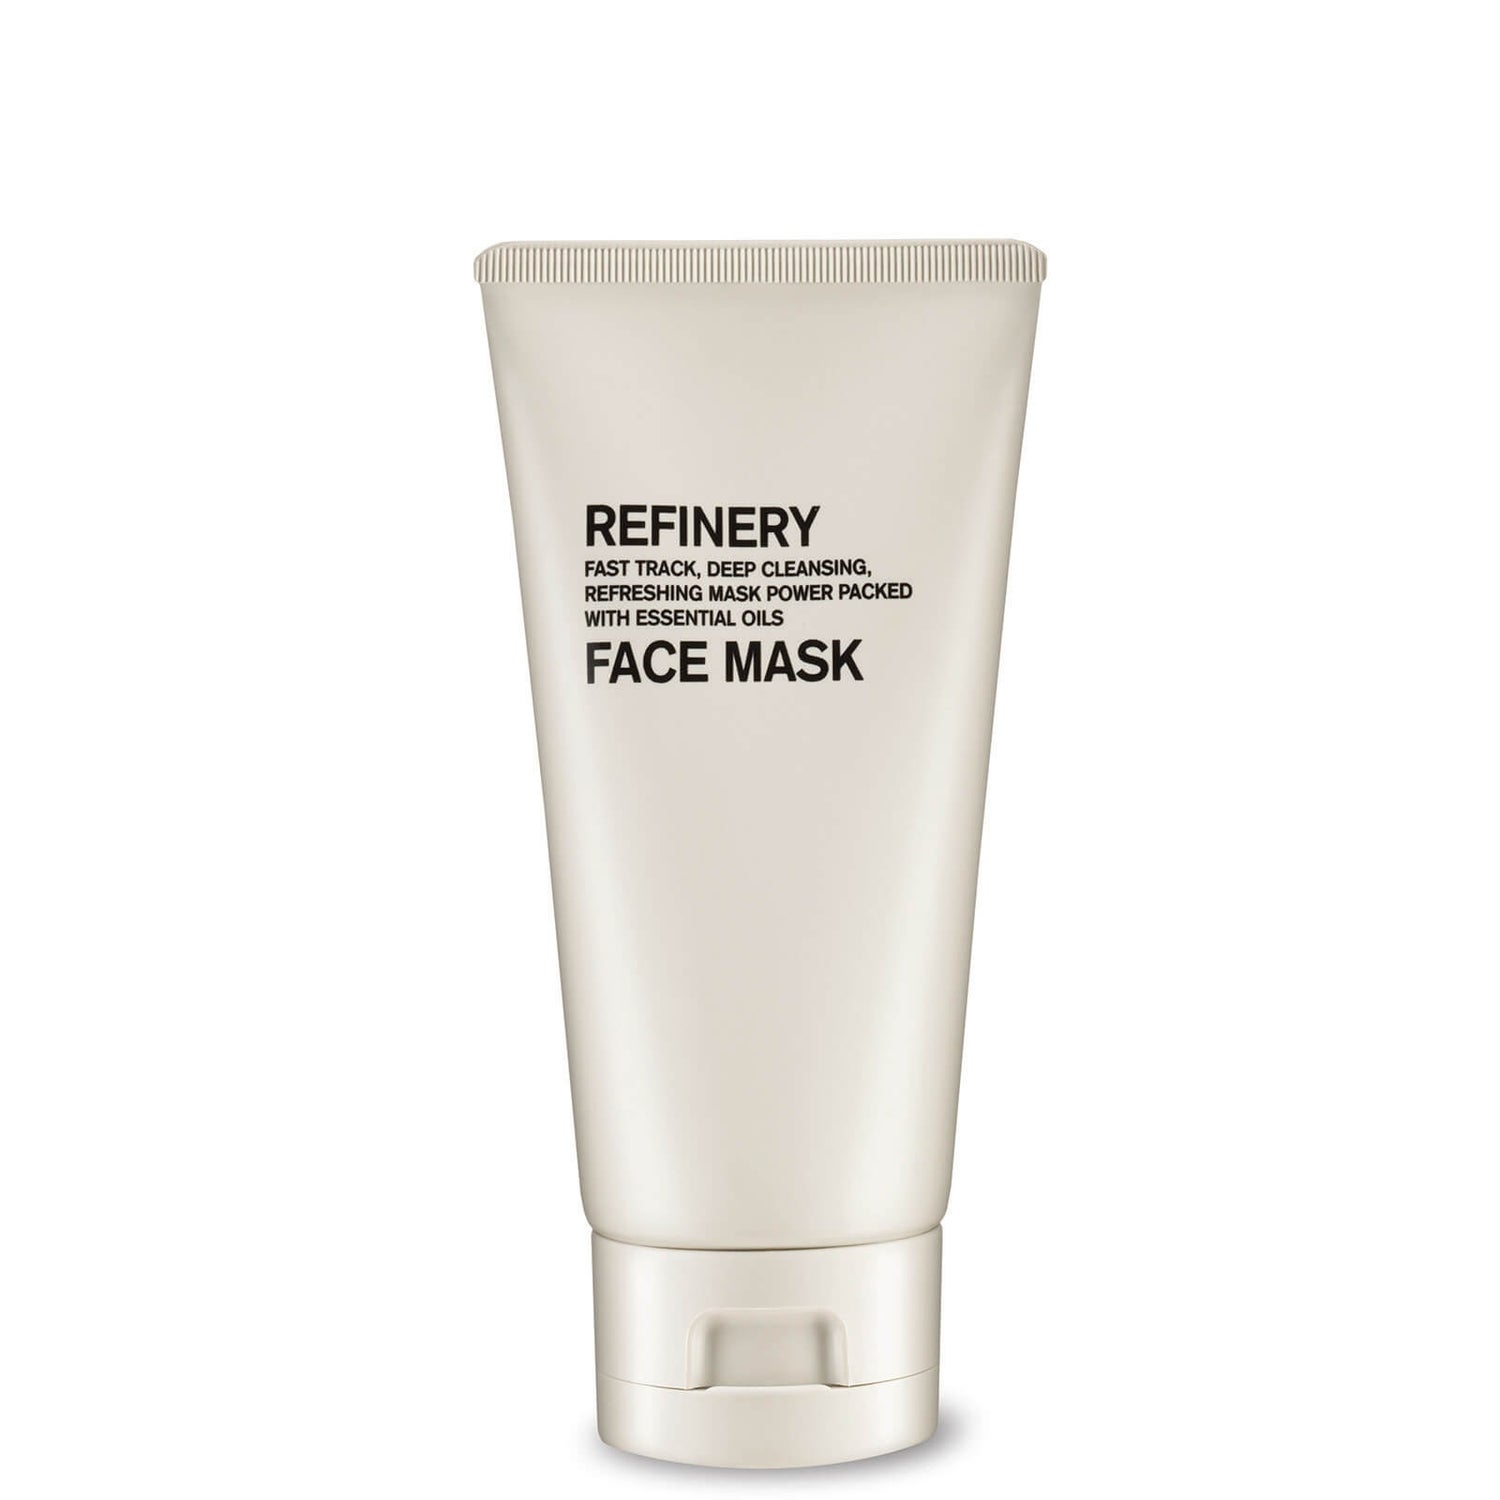 The Refinery Face面膜 75ml